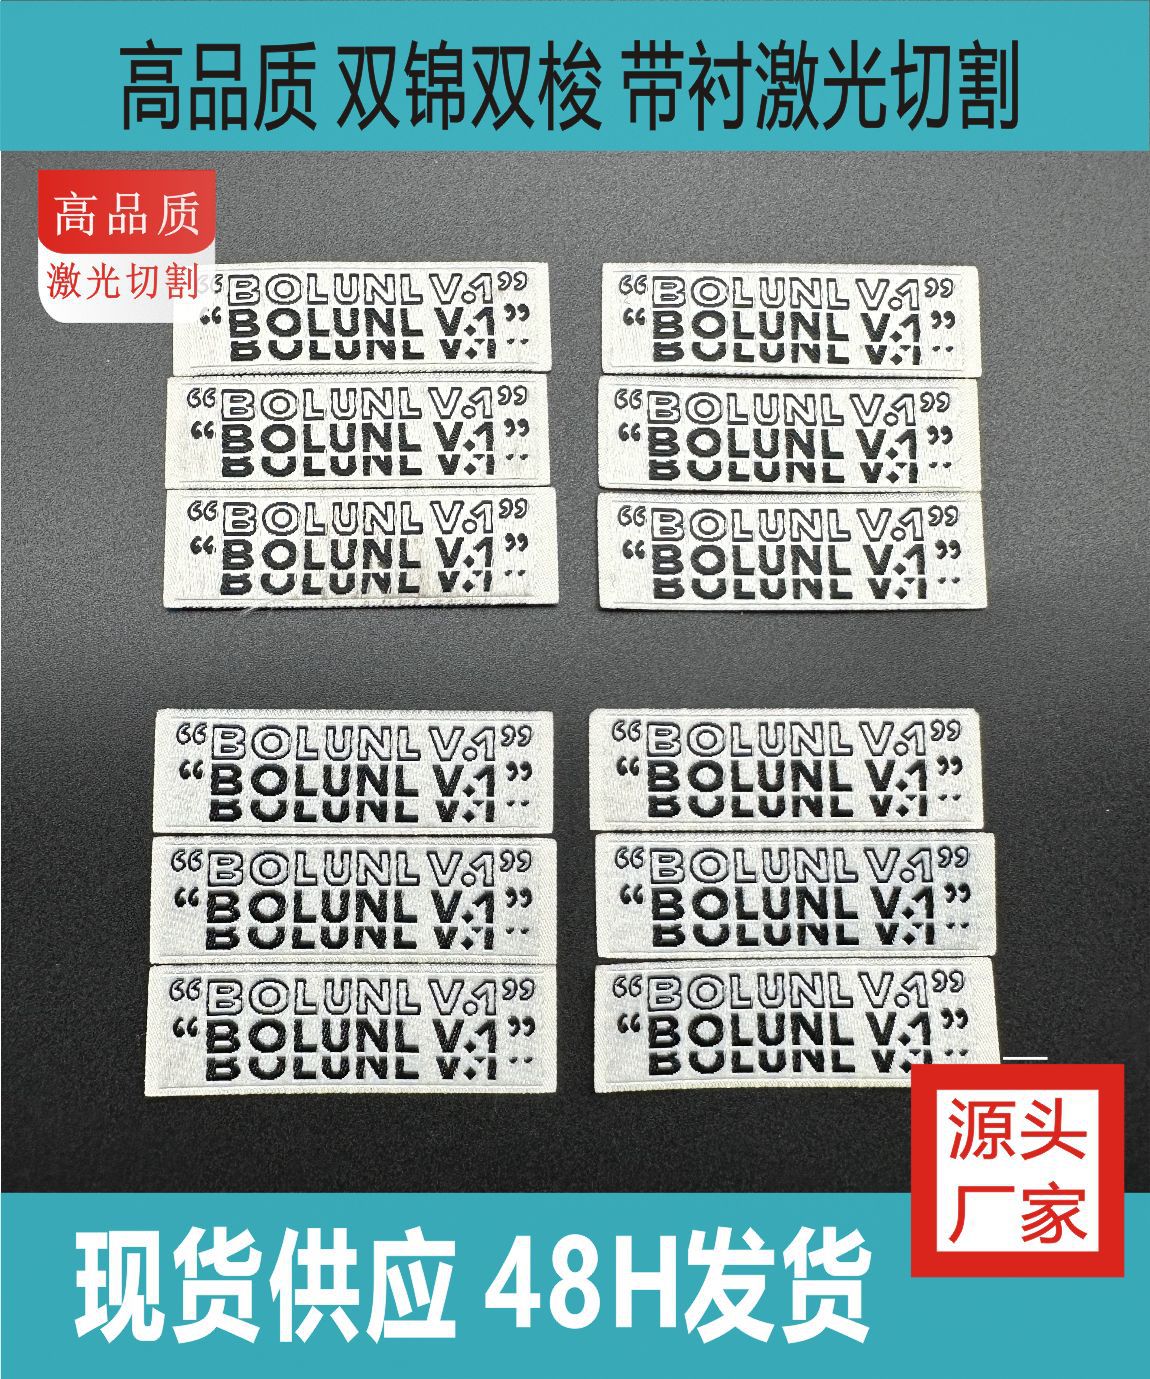 Spot Woven Label Clothing Accessories Ins Weaving Mark Trademark Cloth Label Decorative Labeling Bolunl. V.1 Clothing Accessories